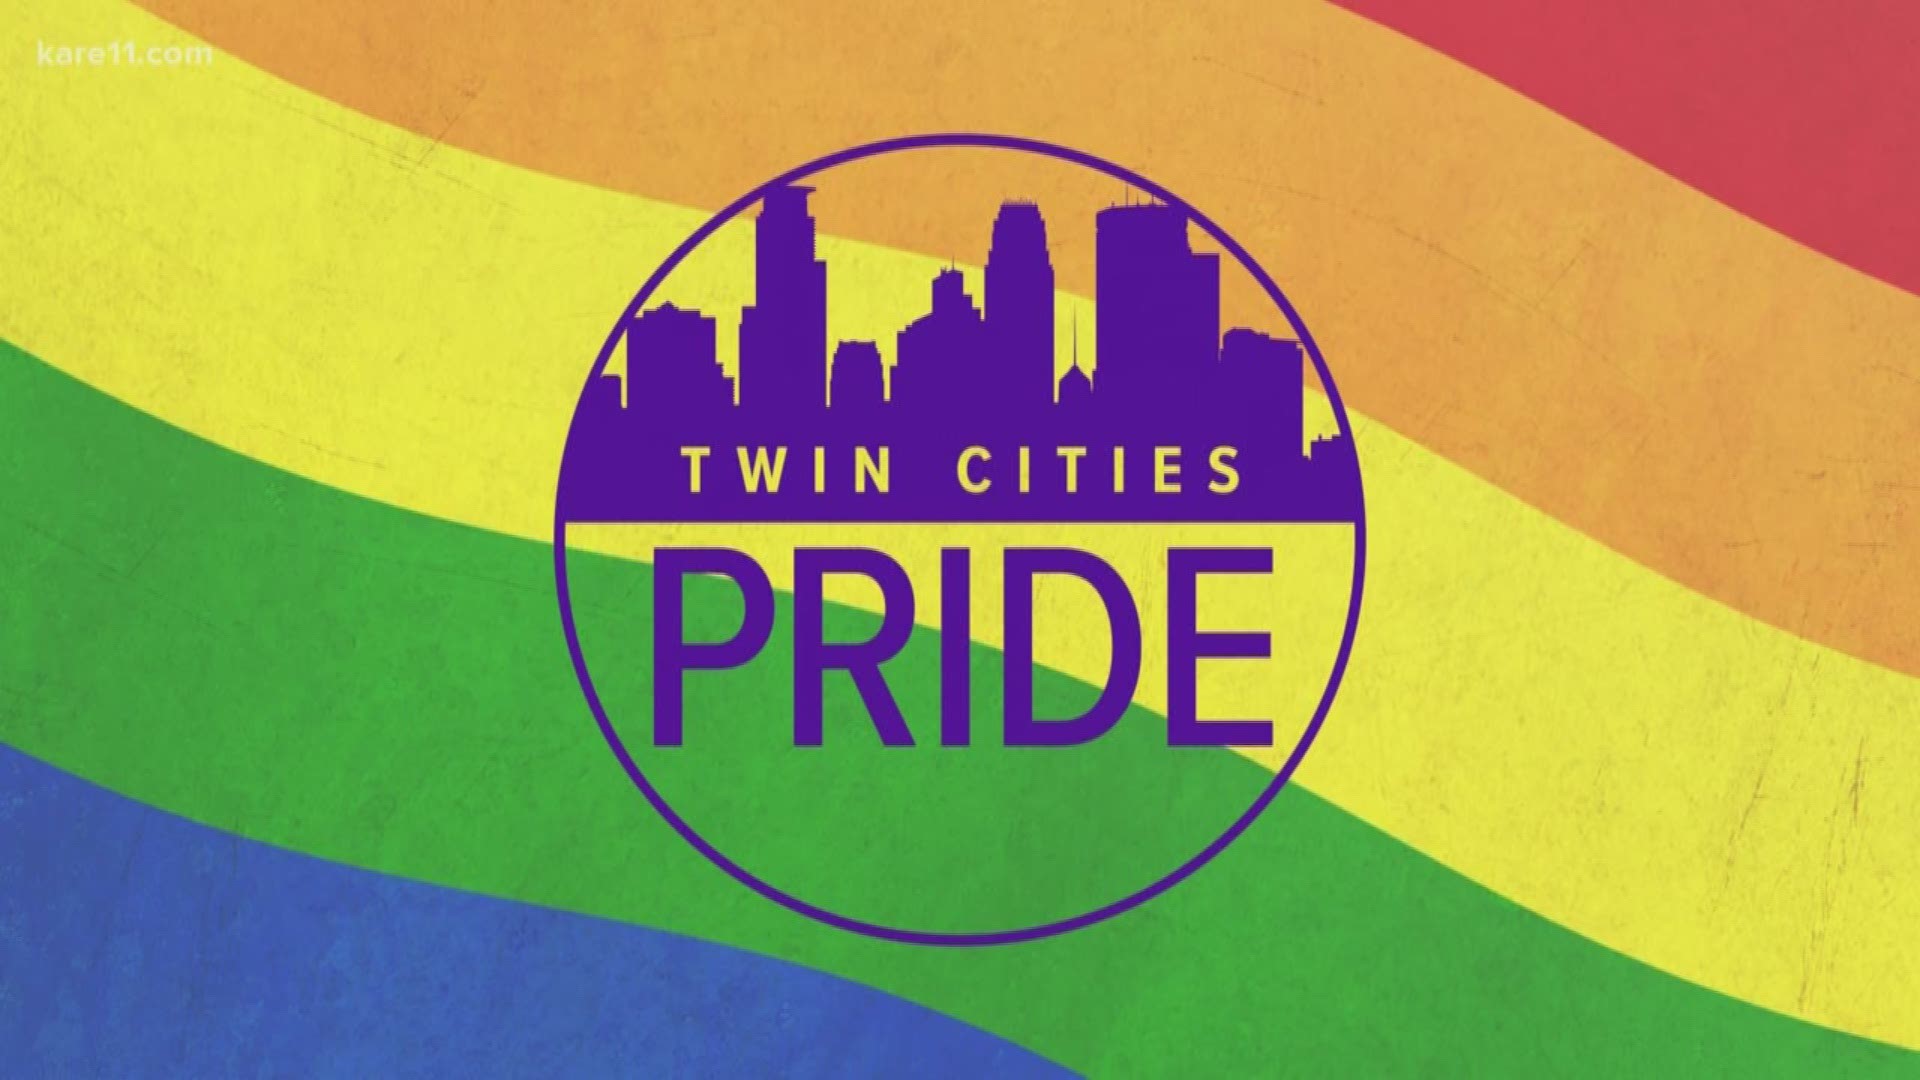 Everything you need to know for Twin Cities Pride 2018